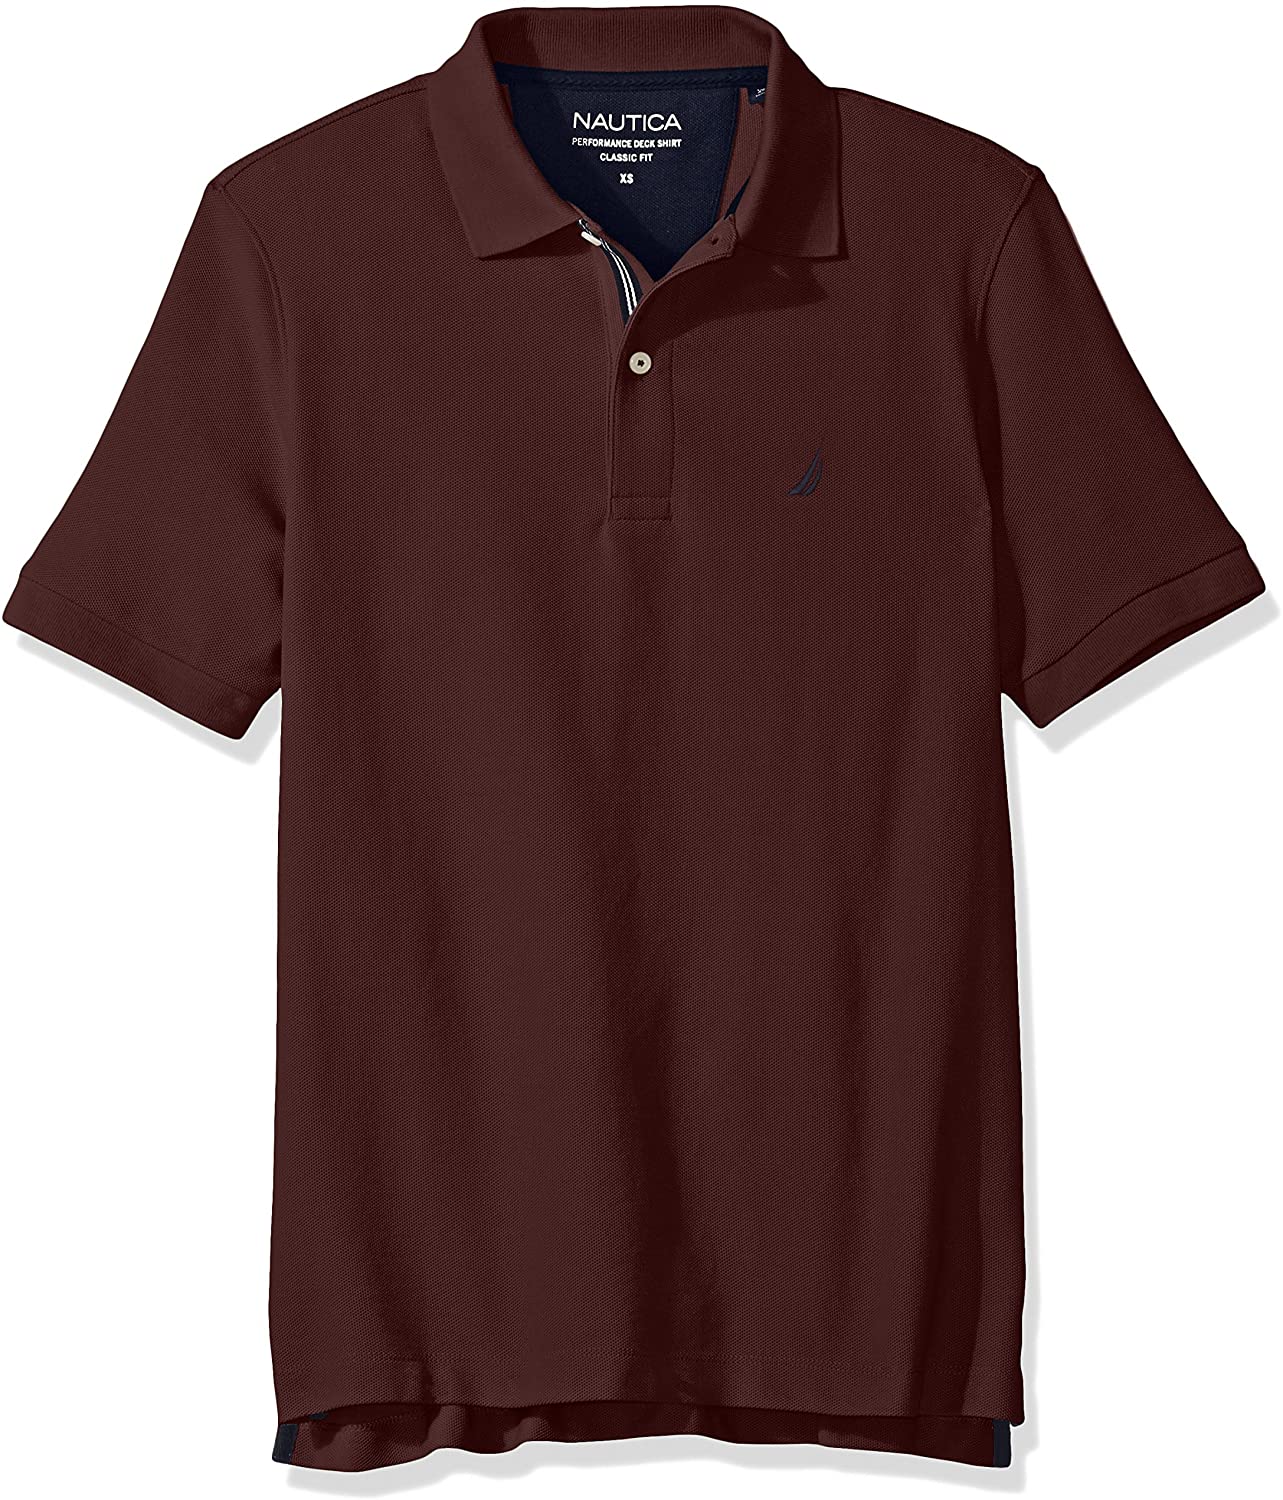 Nautica Men's Classic Short Sleeve Solid Performance Deck Polo Shirt, Deep  Anchor Hea, Medium : Buy Online at Best Price in KSA - Souq is now  : Fashion